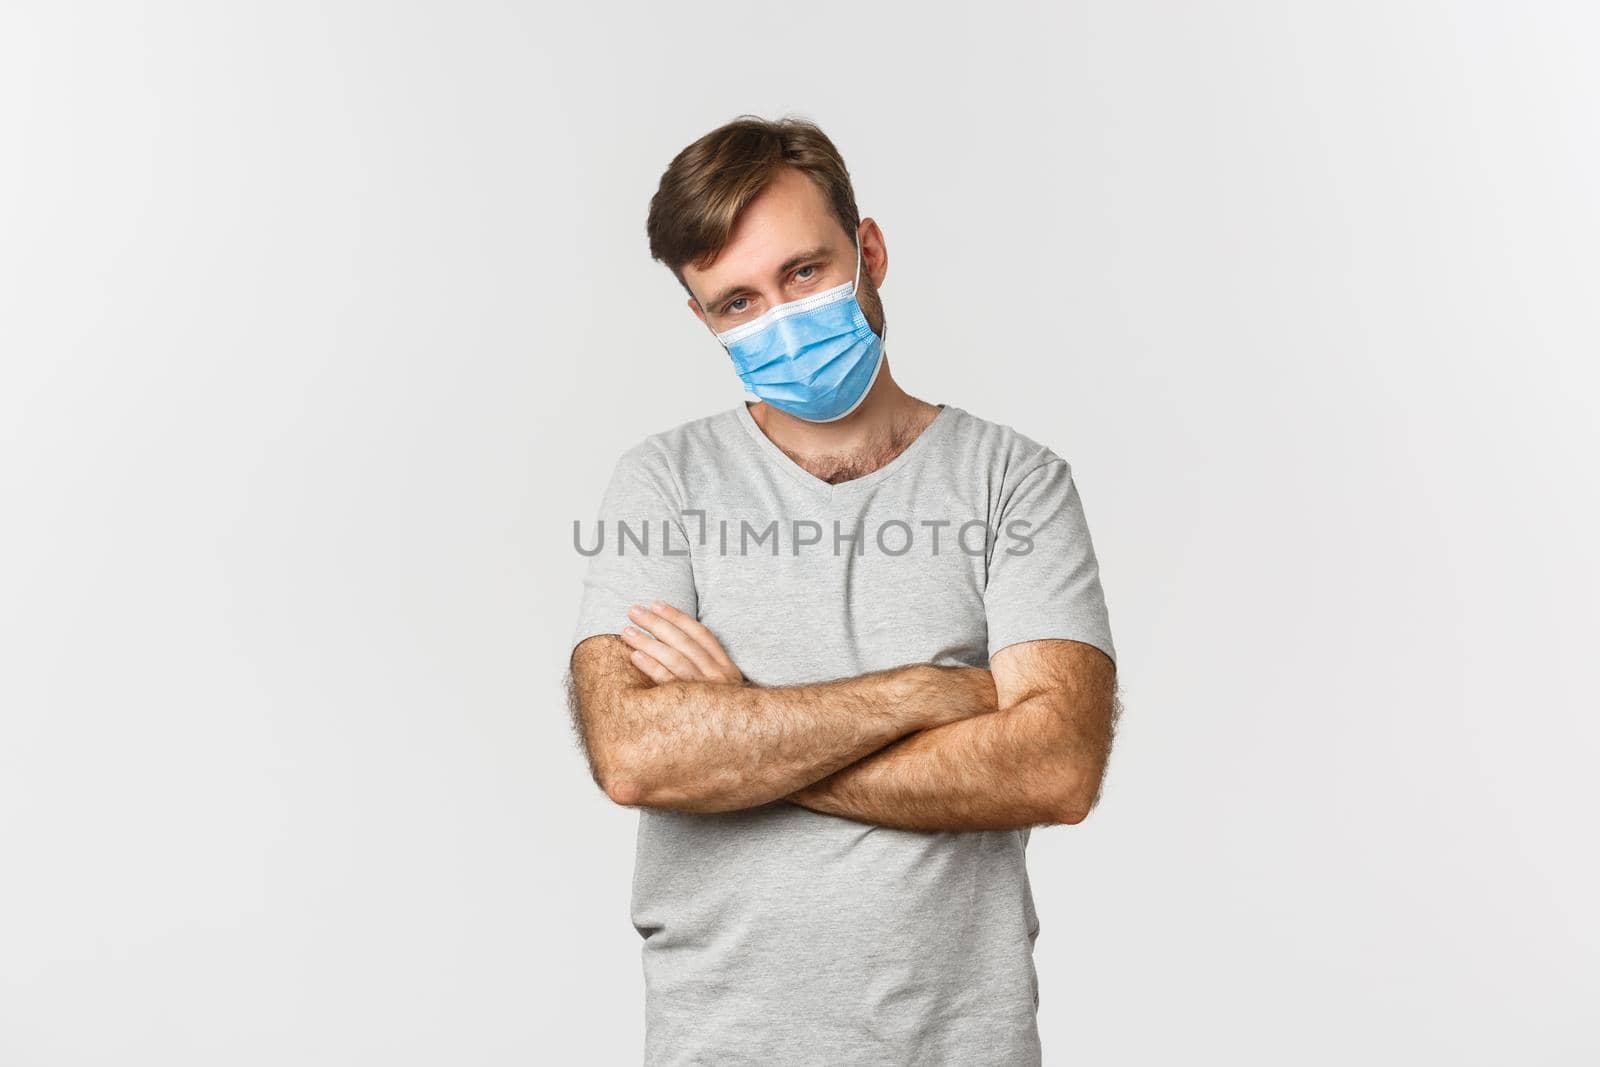 Concept of pandemic, covid-19 and social-distancing. Annoyed young man in gray t-shirt and medical mask, cross arms on chest and looking unamused, standing over white background.